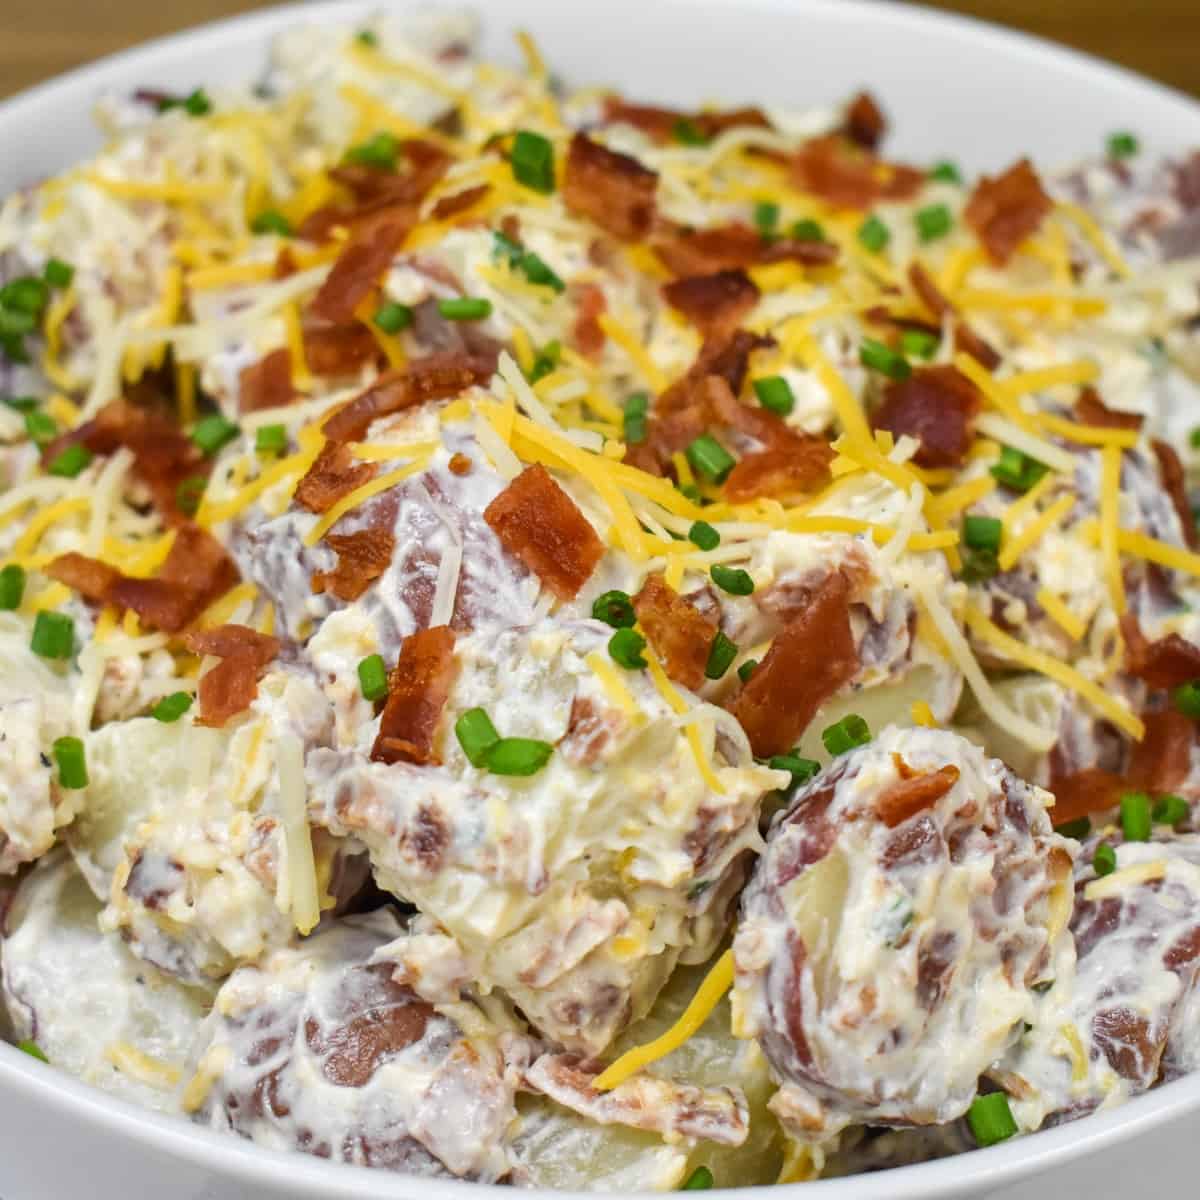 A close up image of the finished potato salad garnished with bacon, cheese, and chives.